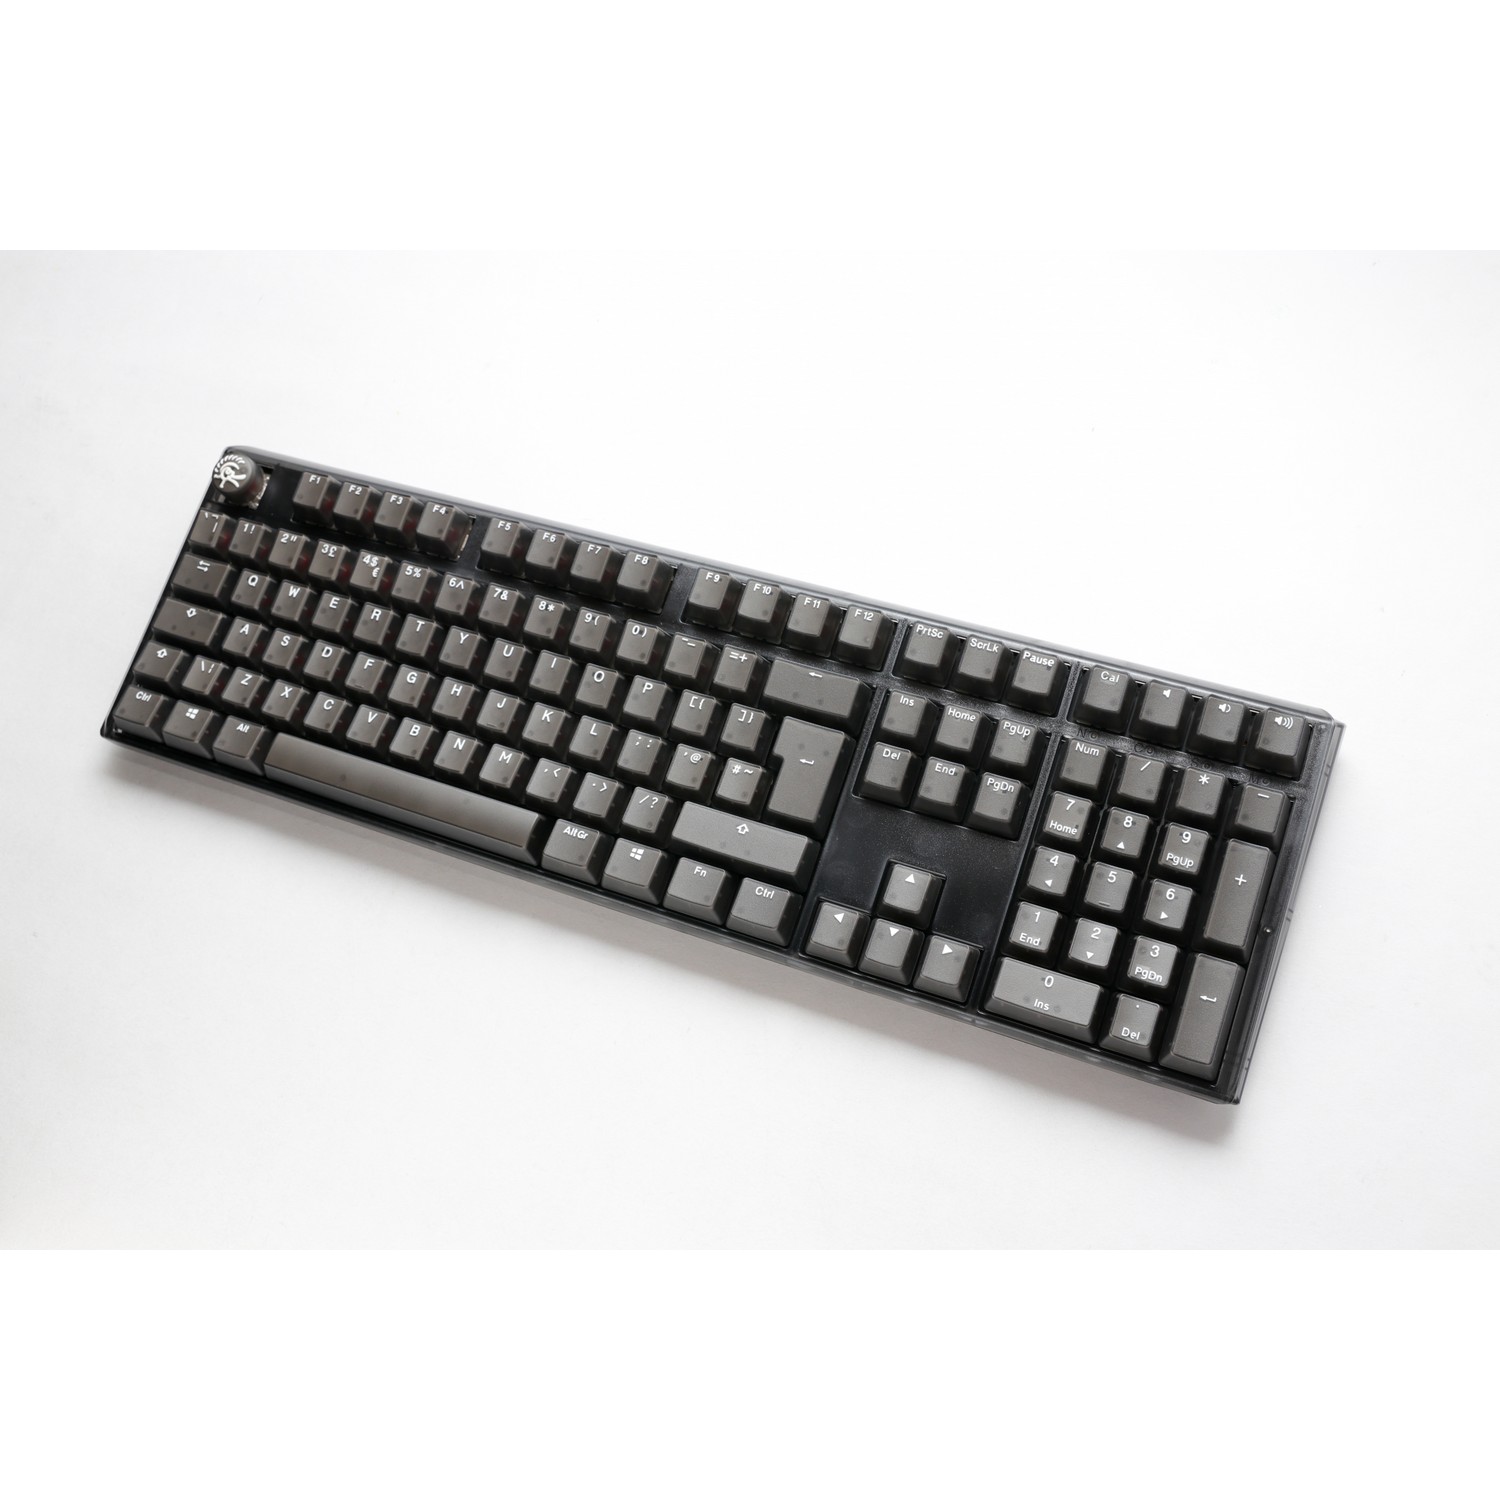 Ducky - Ducky One 3 Aura Mechanical Gaming Keyboard Black Cherry Silent Red Switch UK Layout